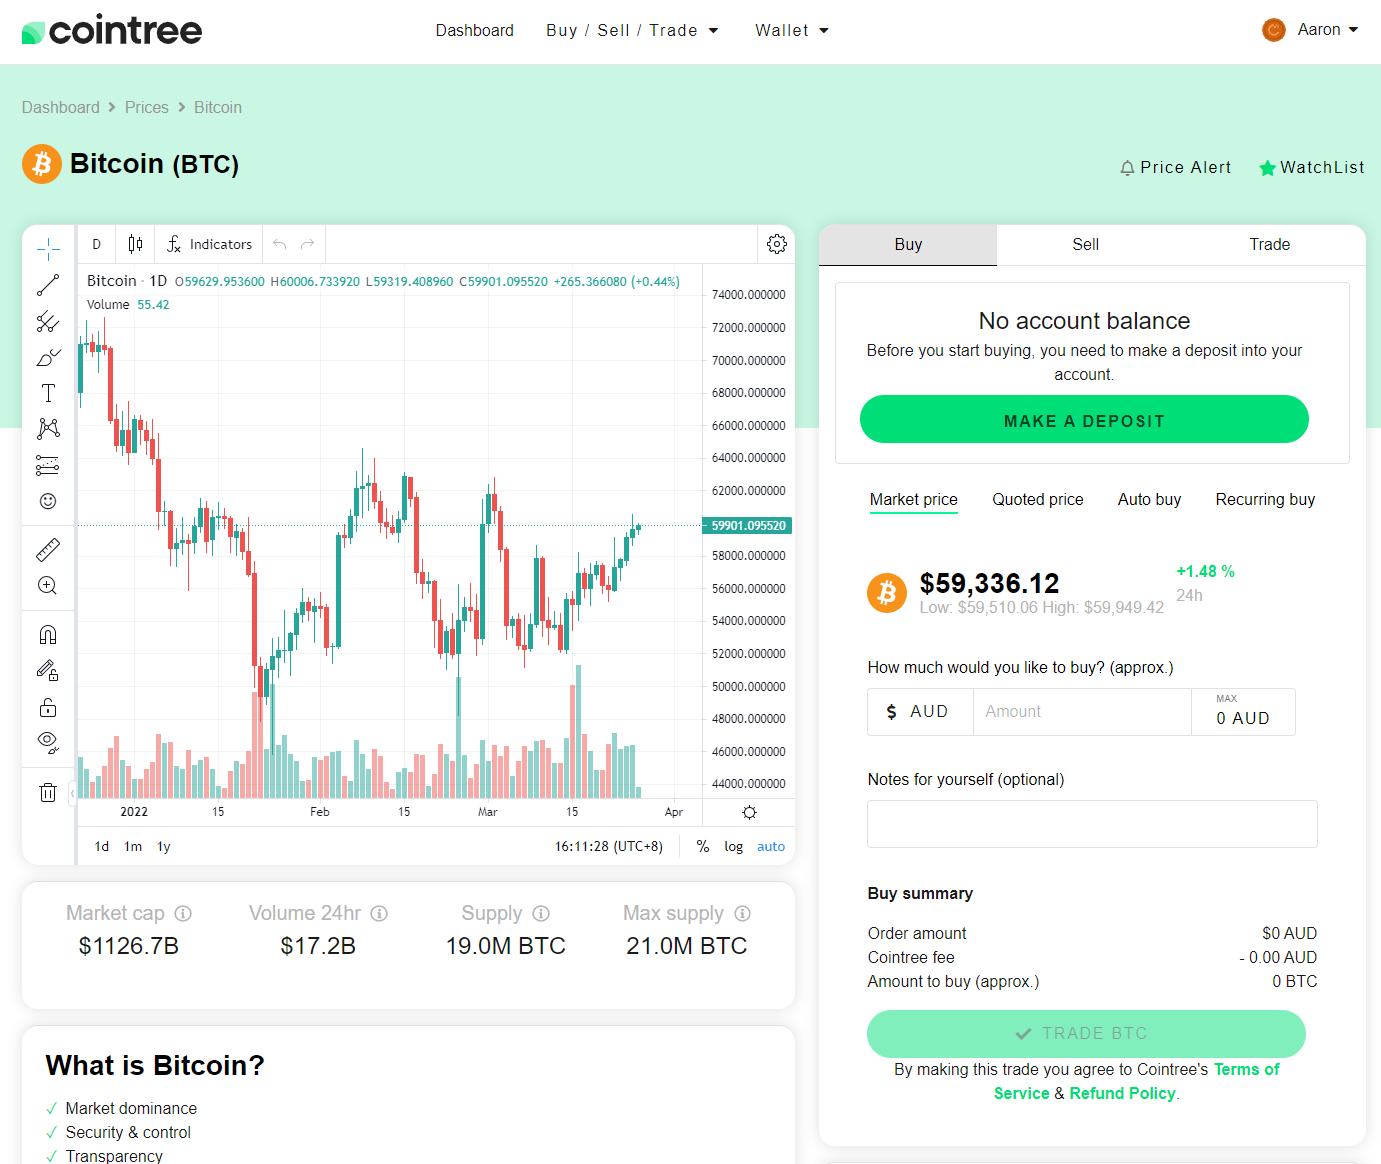 cointree tradingview charting